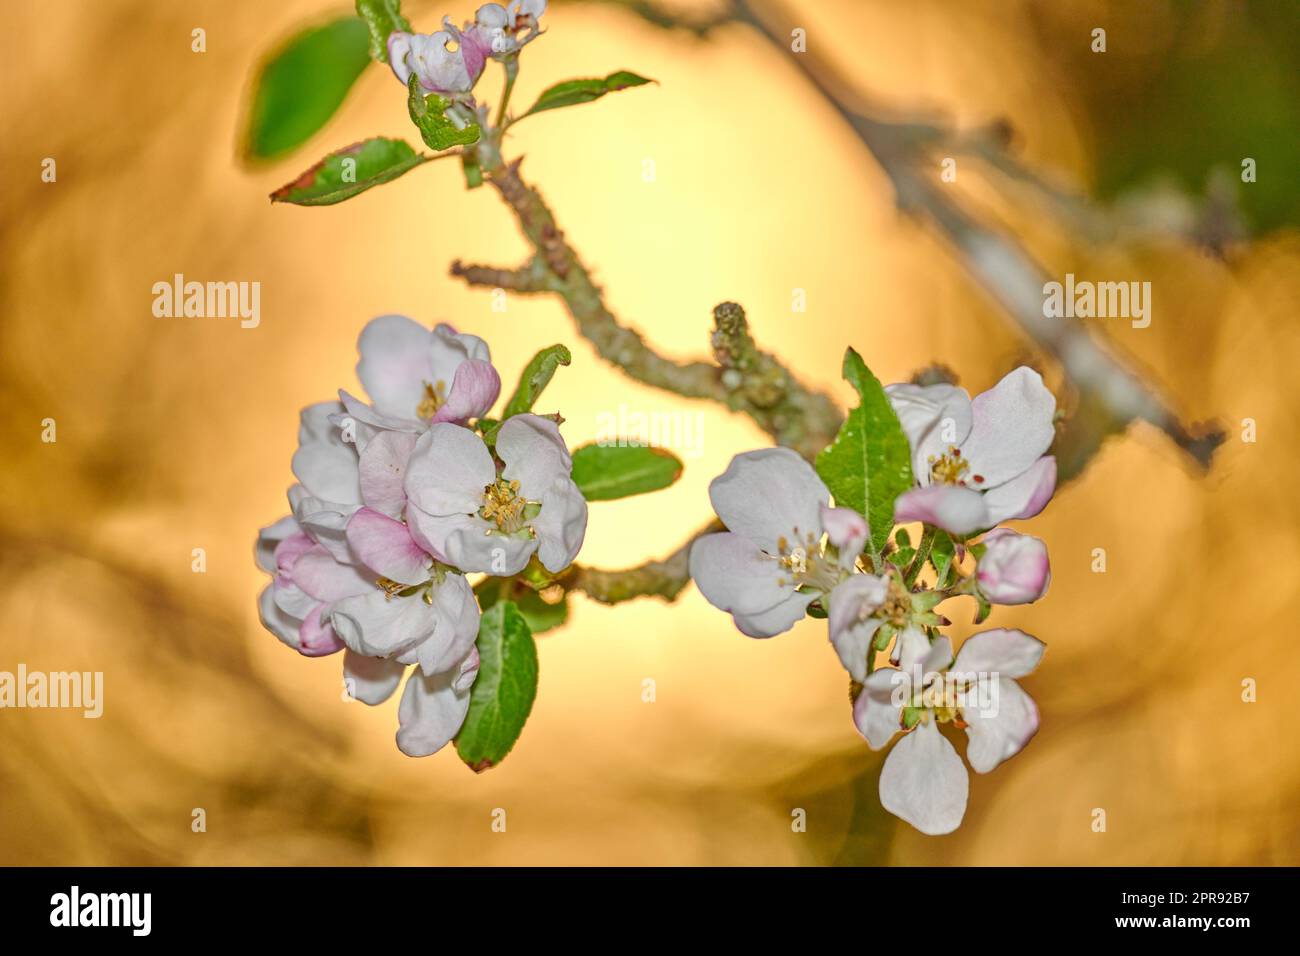 Closeup of a beautiful Paradise apple flowers against a soft glowing golden background. Zoom in on nature blooming on a tree branch in a garden. Macro details of beauty in soothing nature Stock Photo